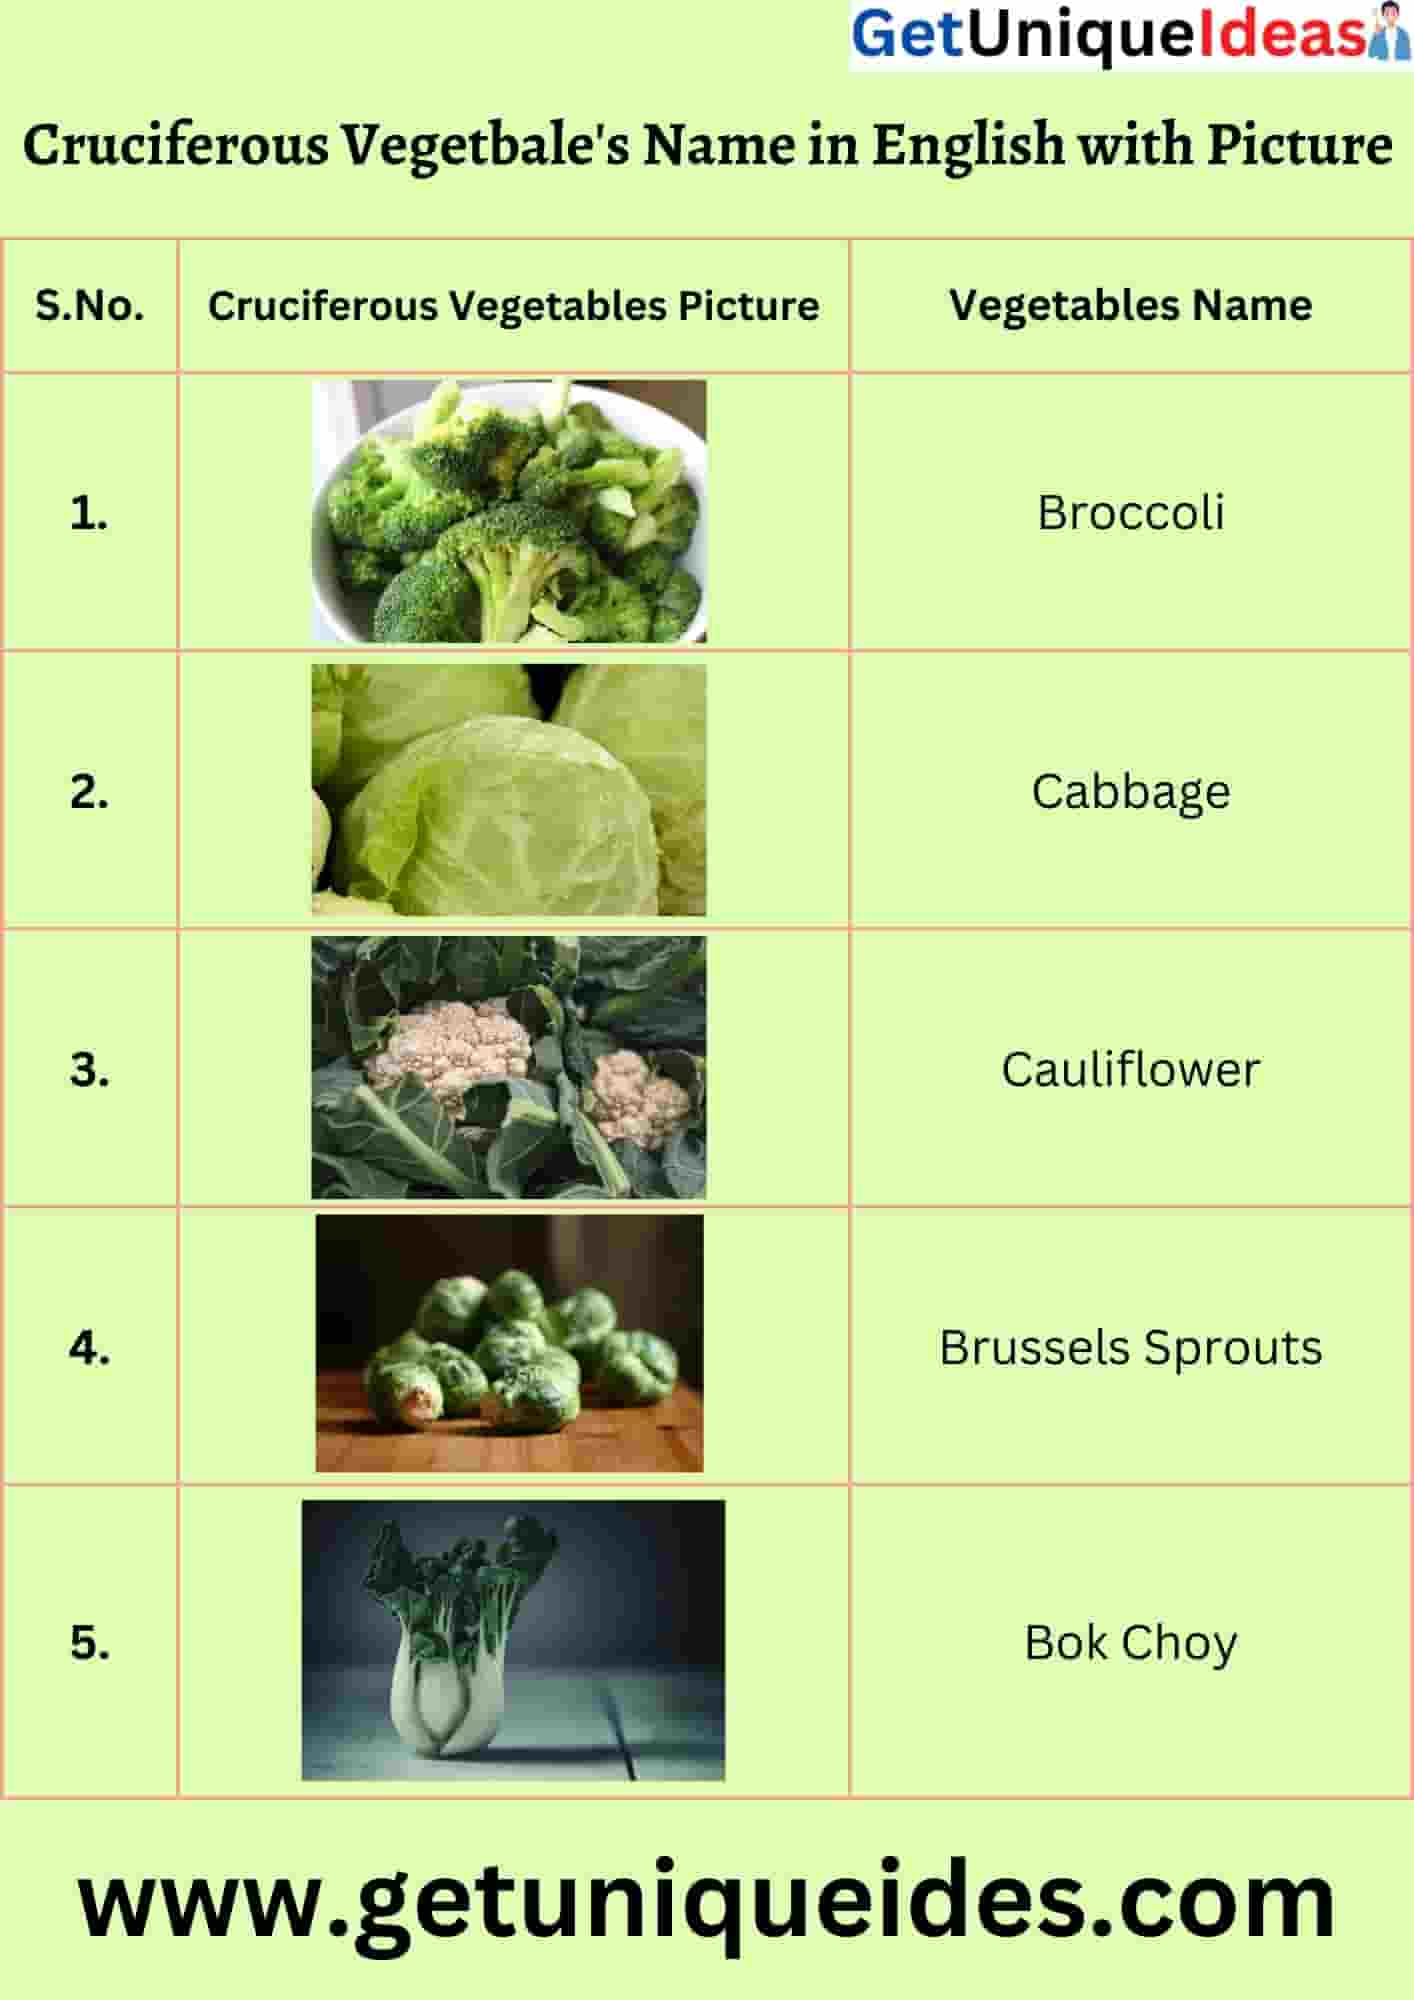 Cruciferous vegetable's Name in English with Picture